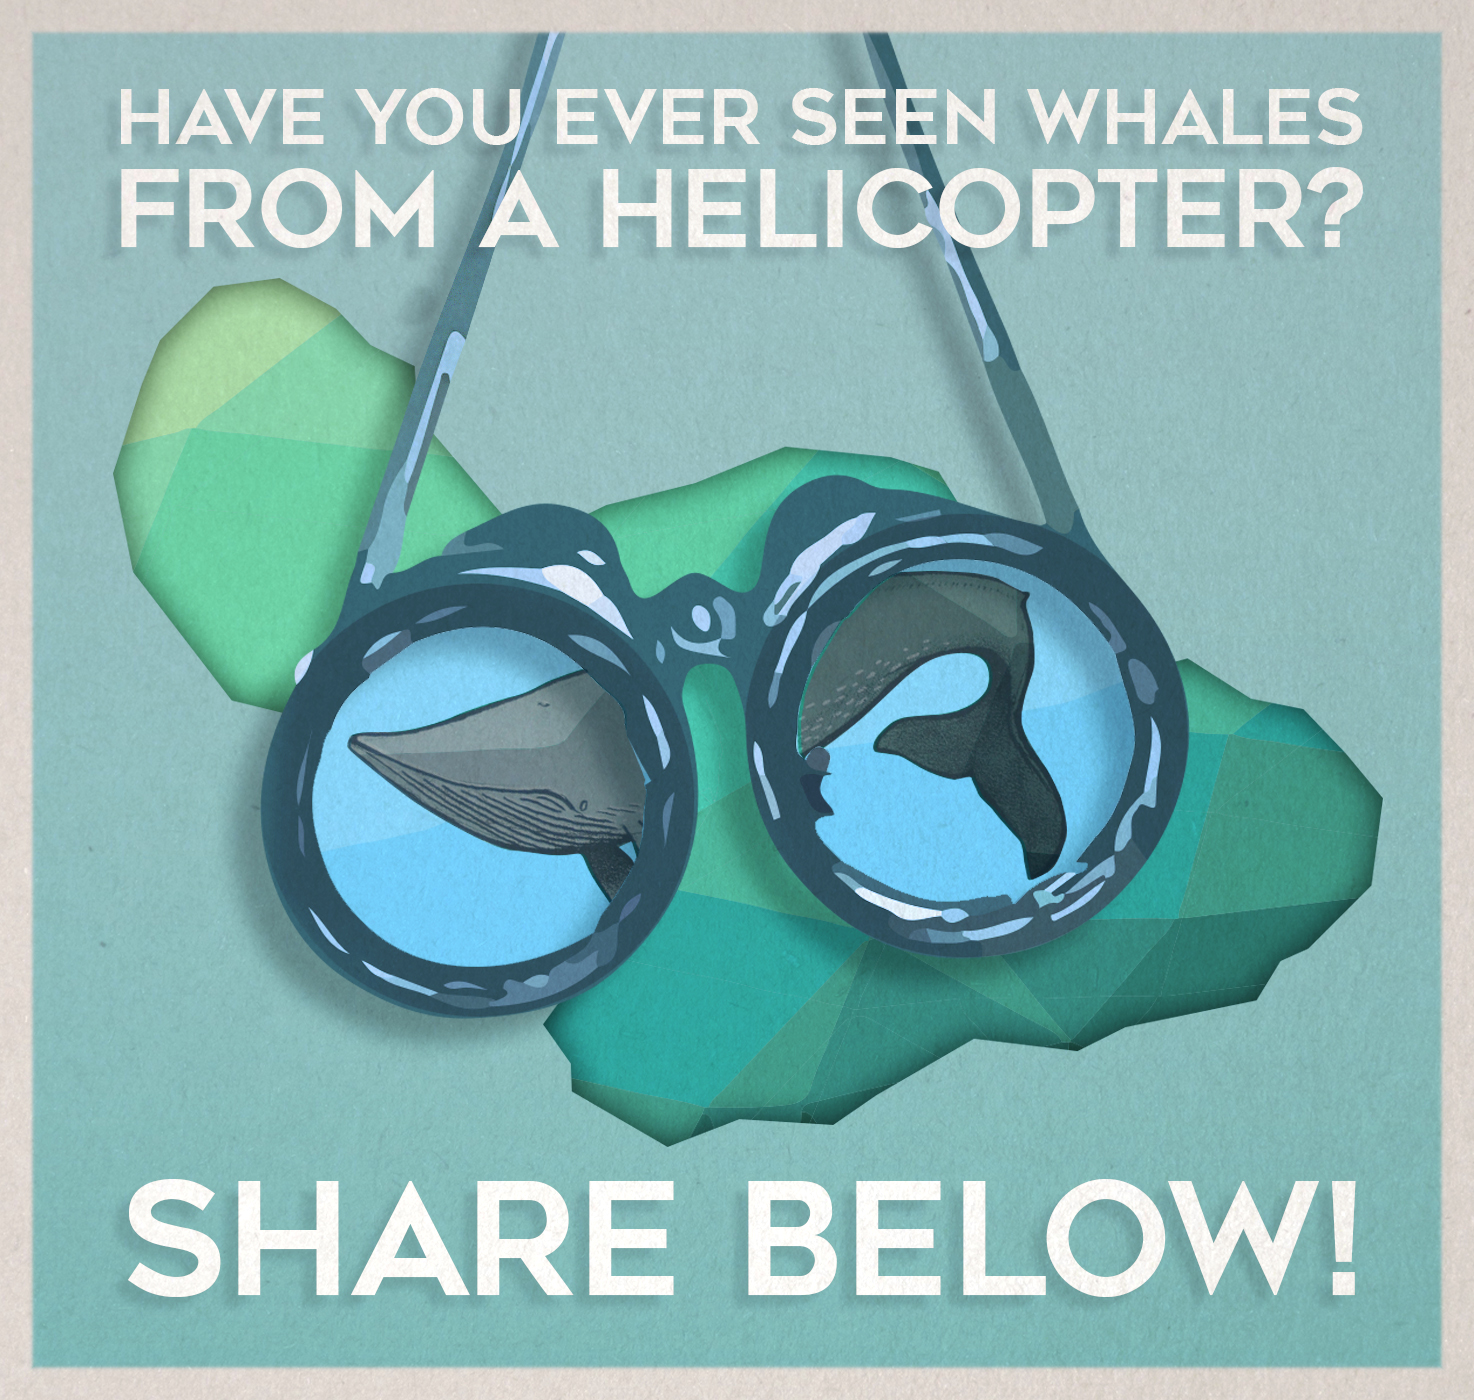 have you ever seen a whale from a helicopter? share below!